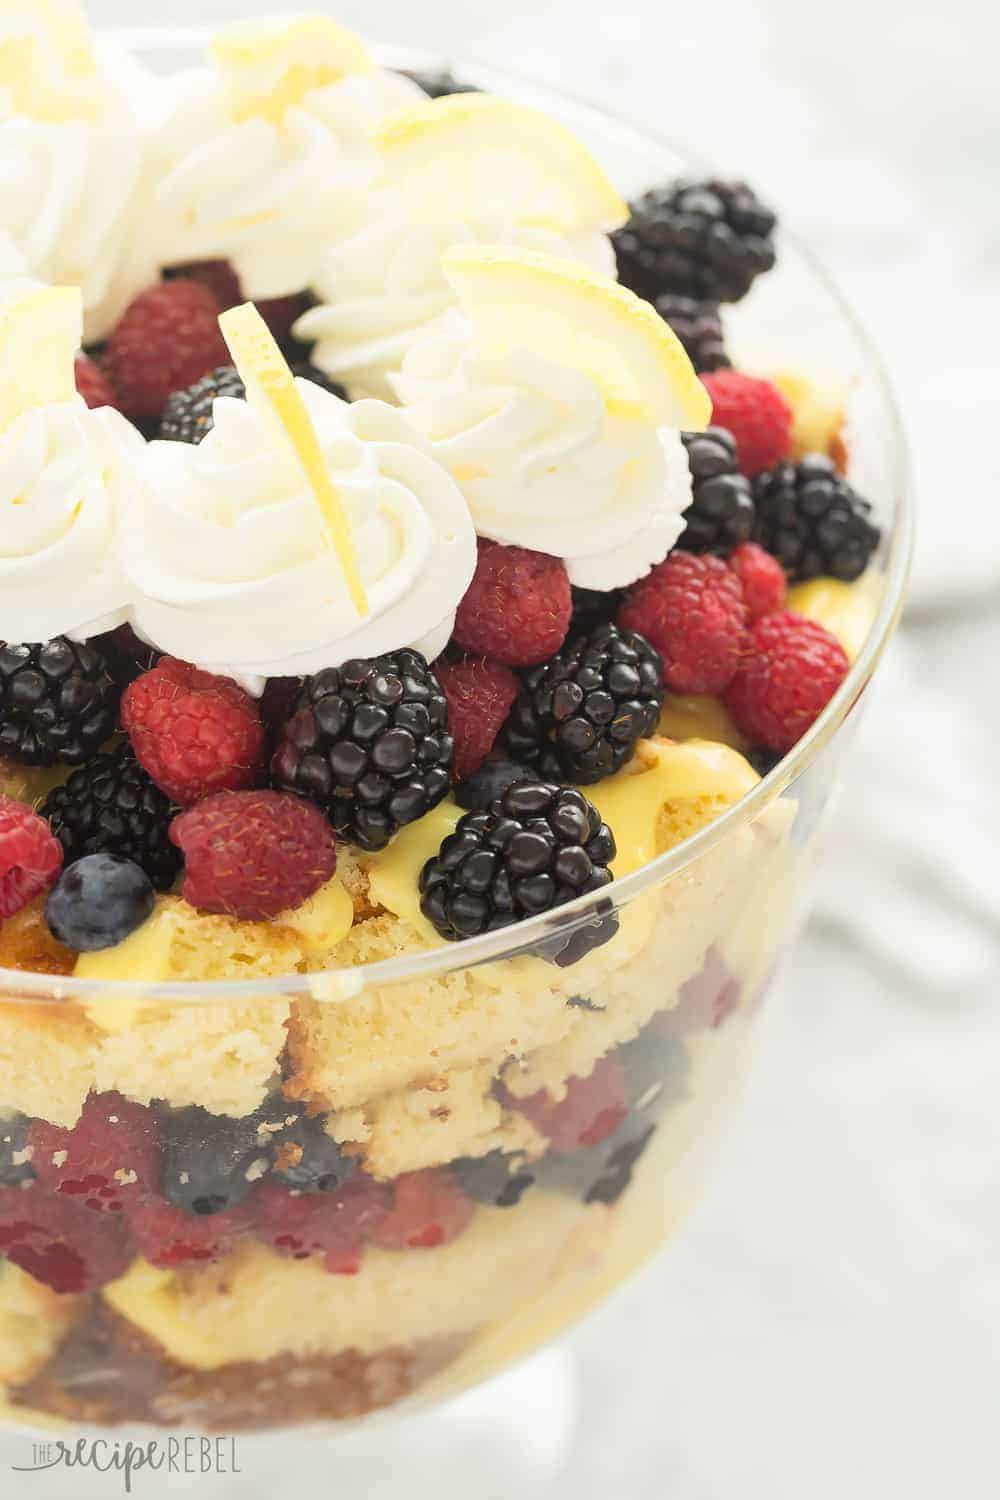 This Lemon Berry Trifle is perfectly tart and sweet, with a citrusy lemon cake, vanilla pudding, whipped cream and a load of berries! It's the perfect dessert for Easter or Spring.